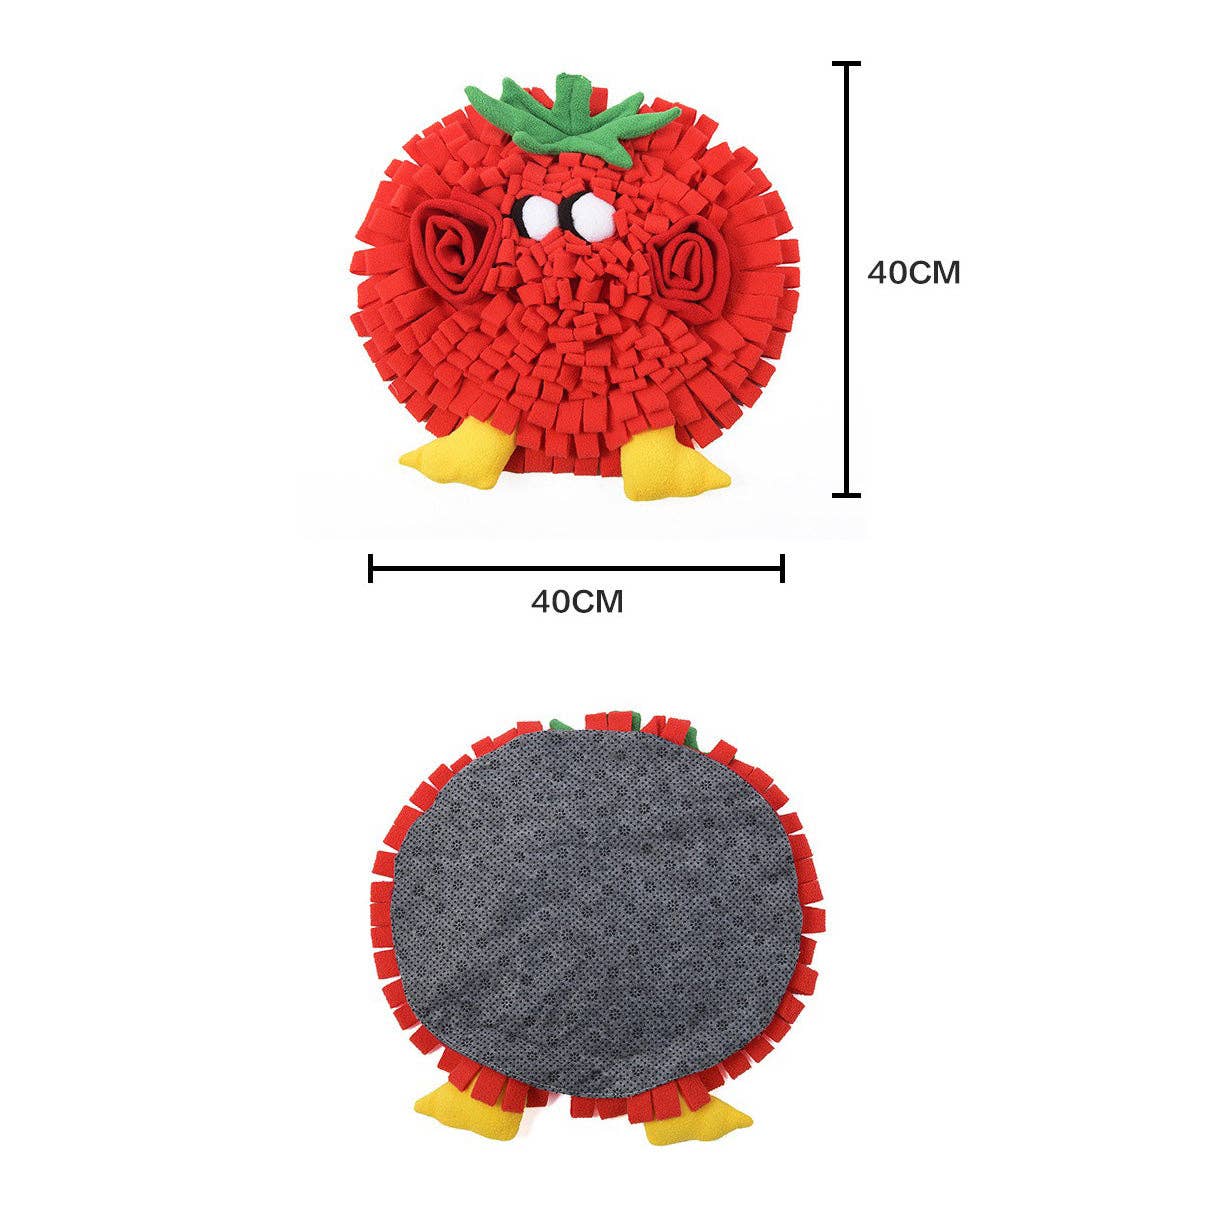 Cute Veggie Snuffle Mat for Pets - Promotes Healthy eating!